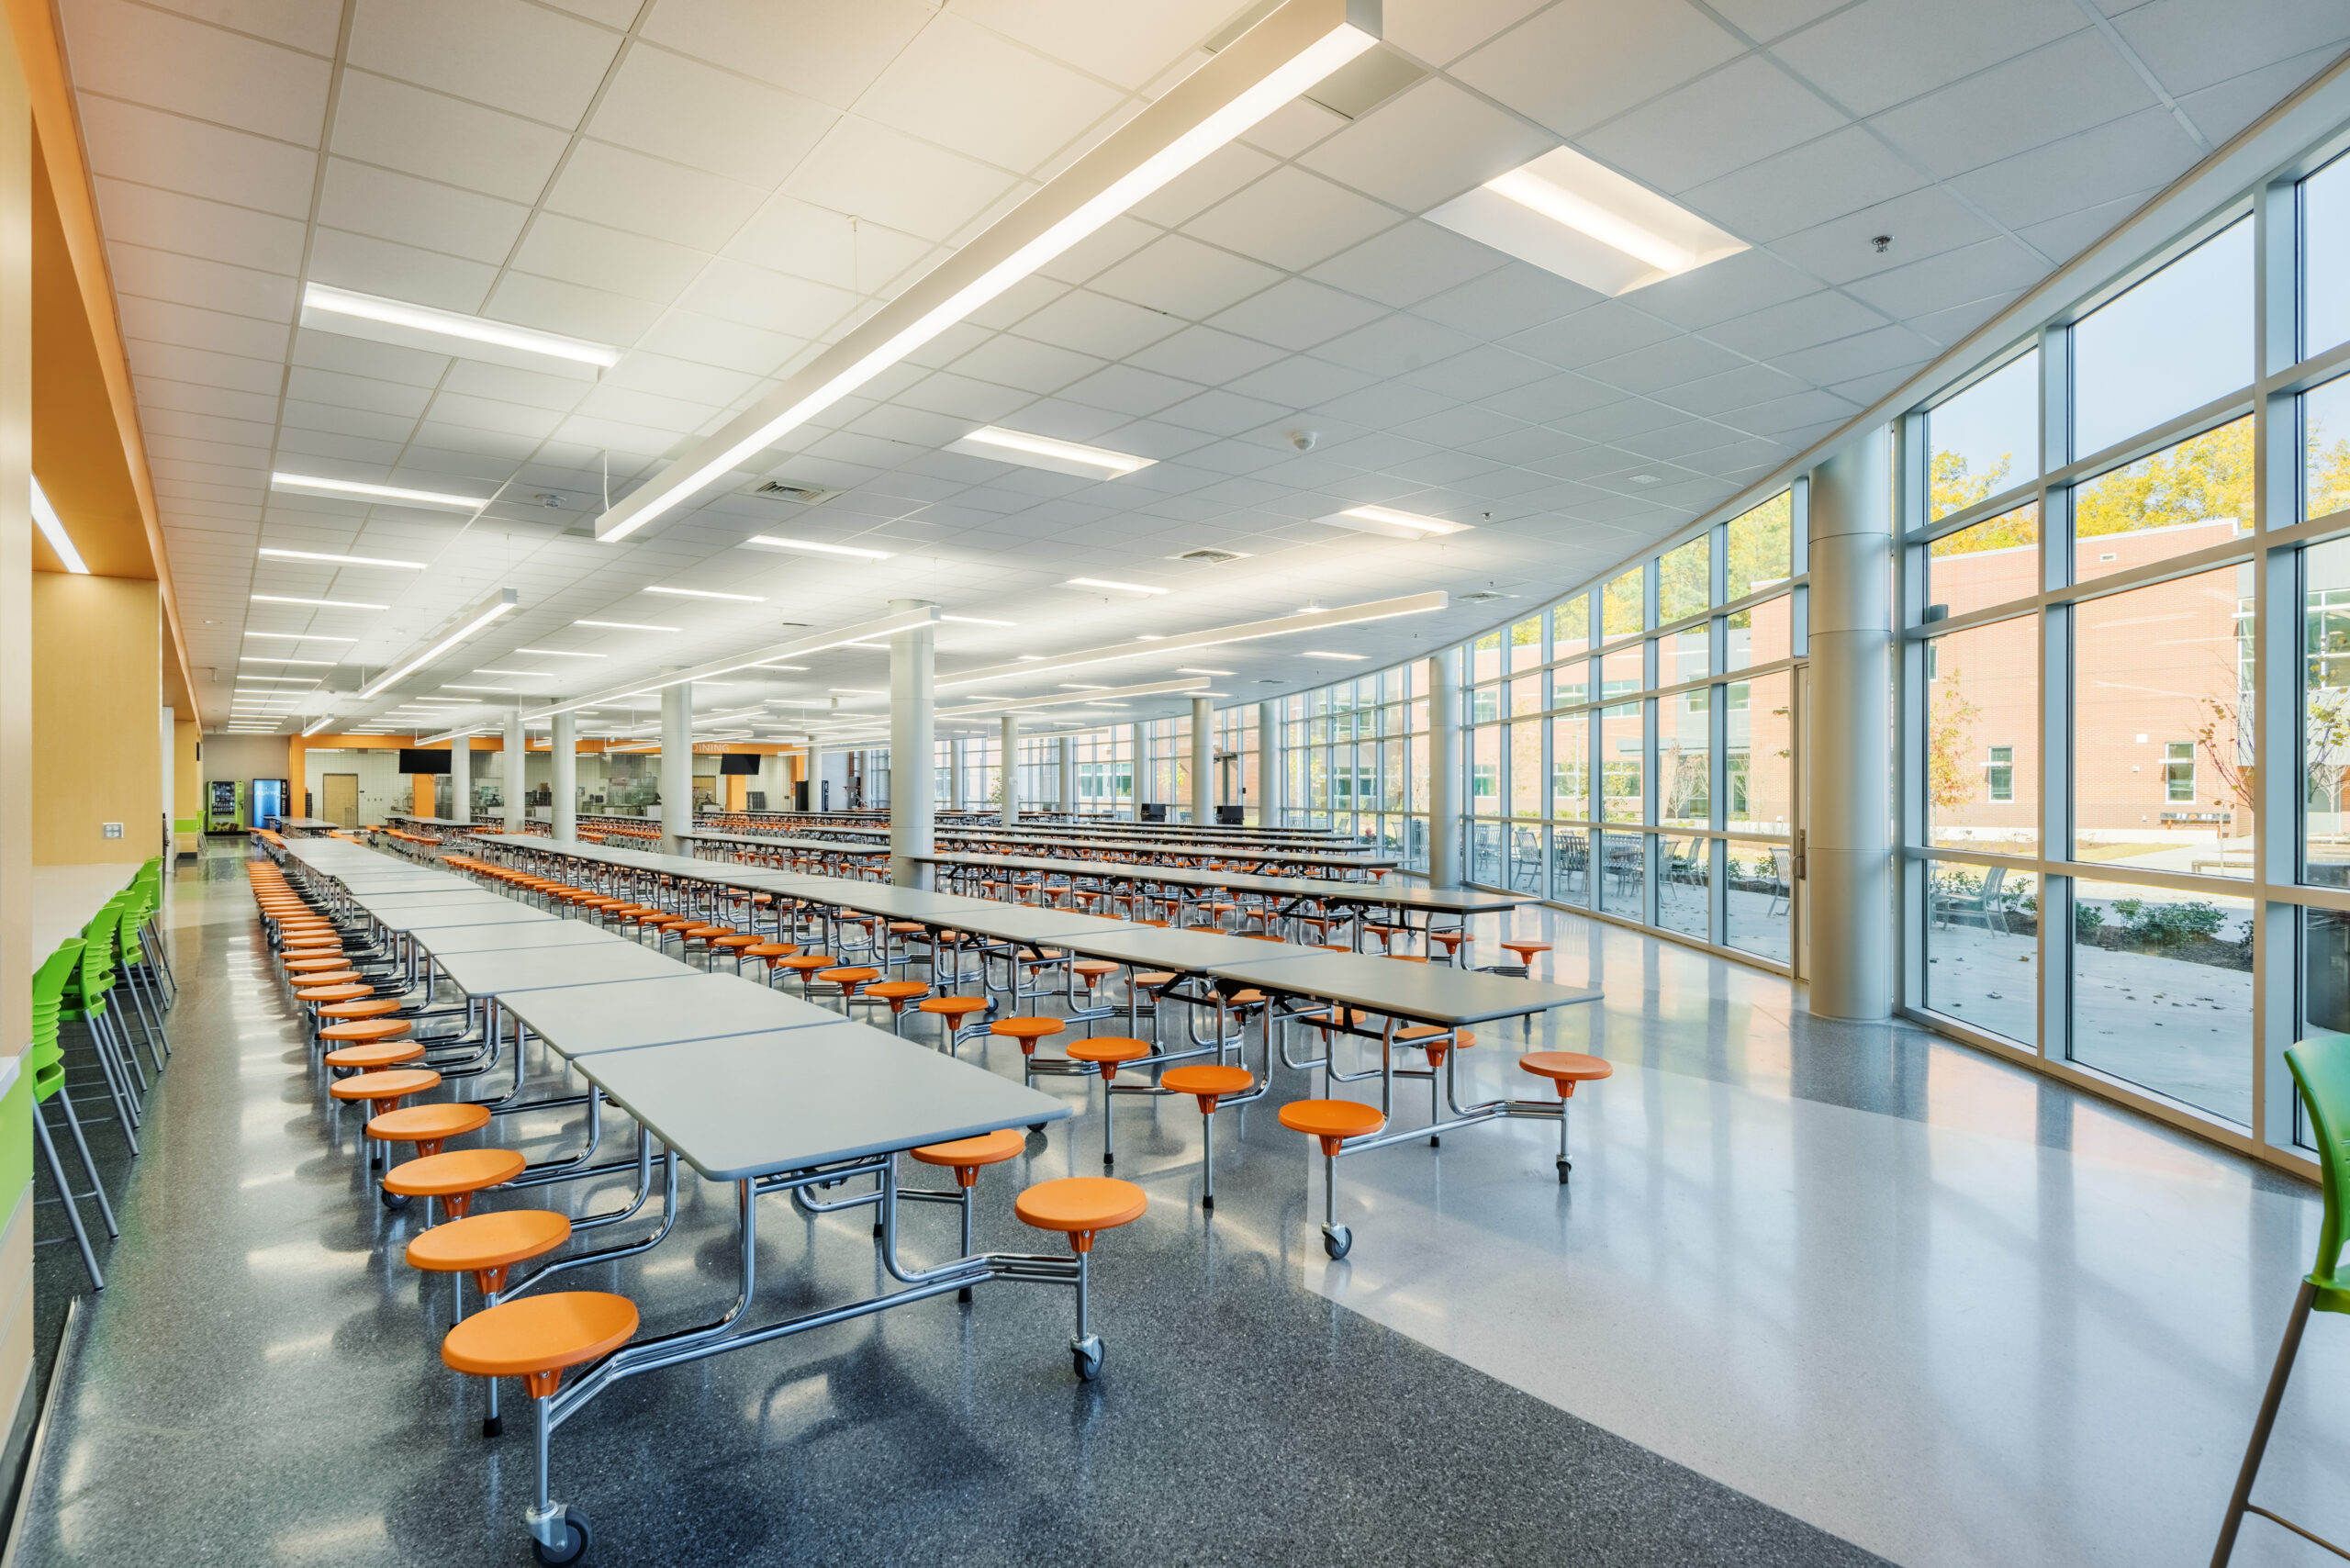 Fuquay-Varina High School Cafeteria with Telescoping Lunch Tables and Colorful Stools